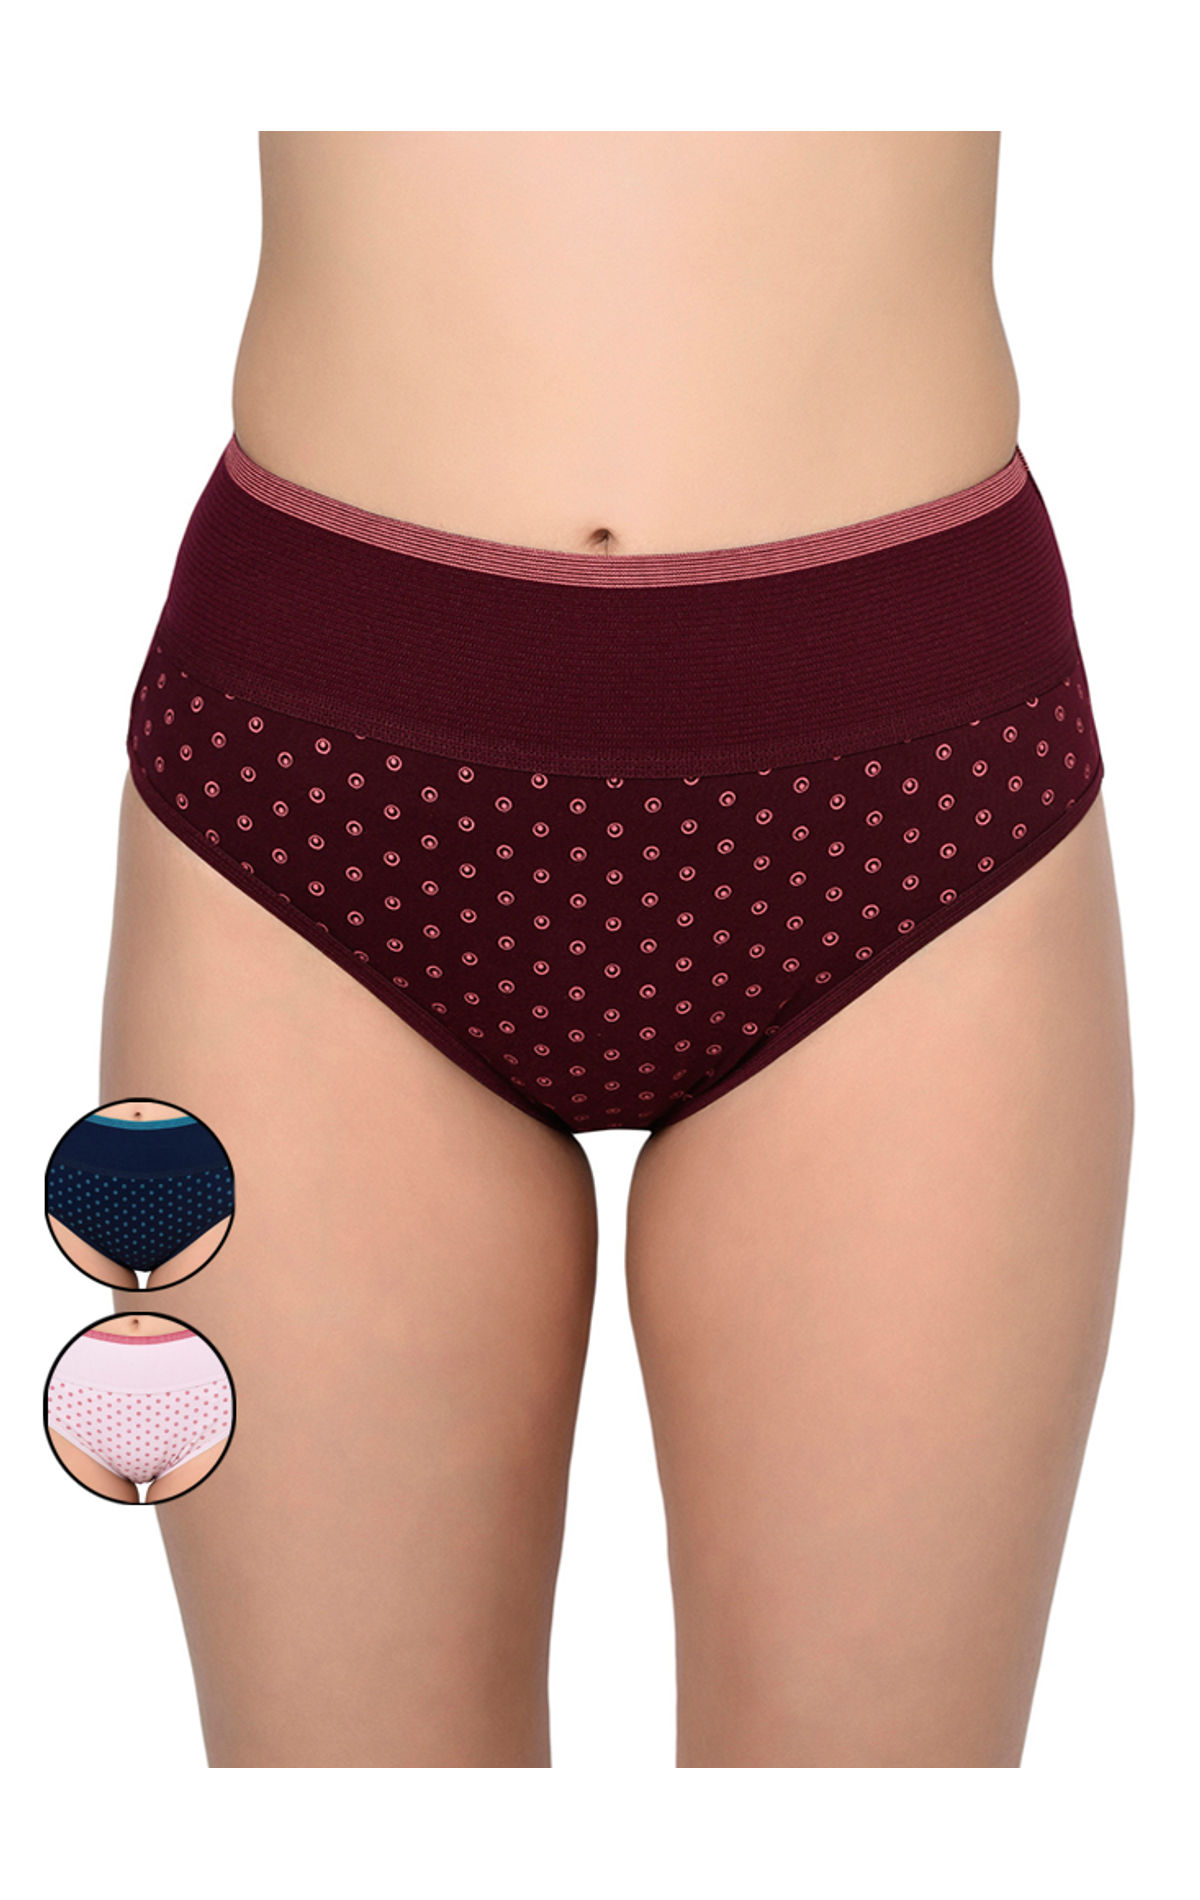 Bodycare Pack Of 3 Tummy Controller Panty In Assorted Colors-2925-3pcs, 2925-3pcs